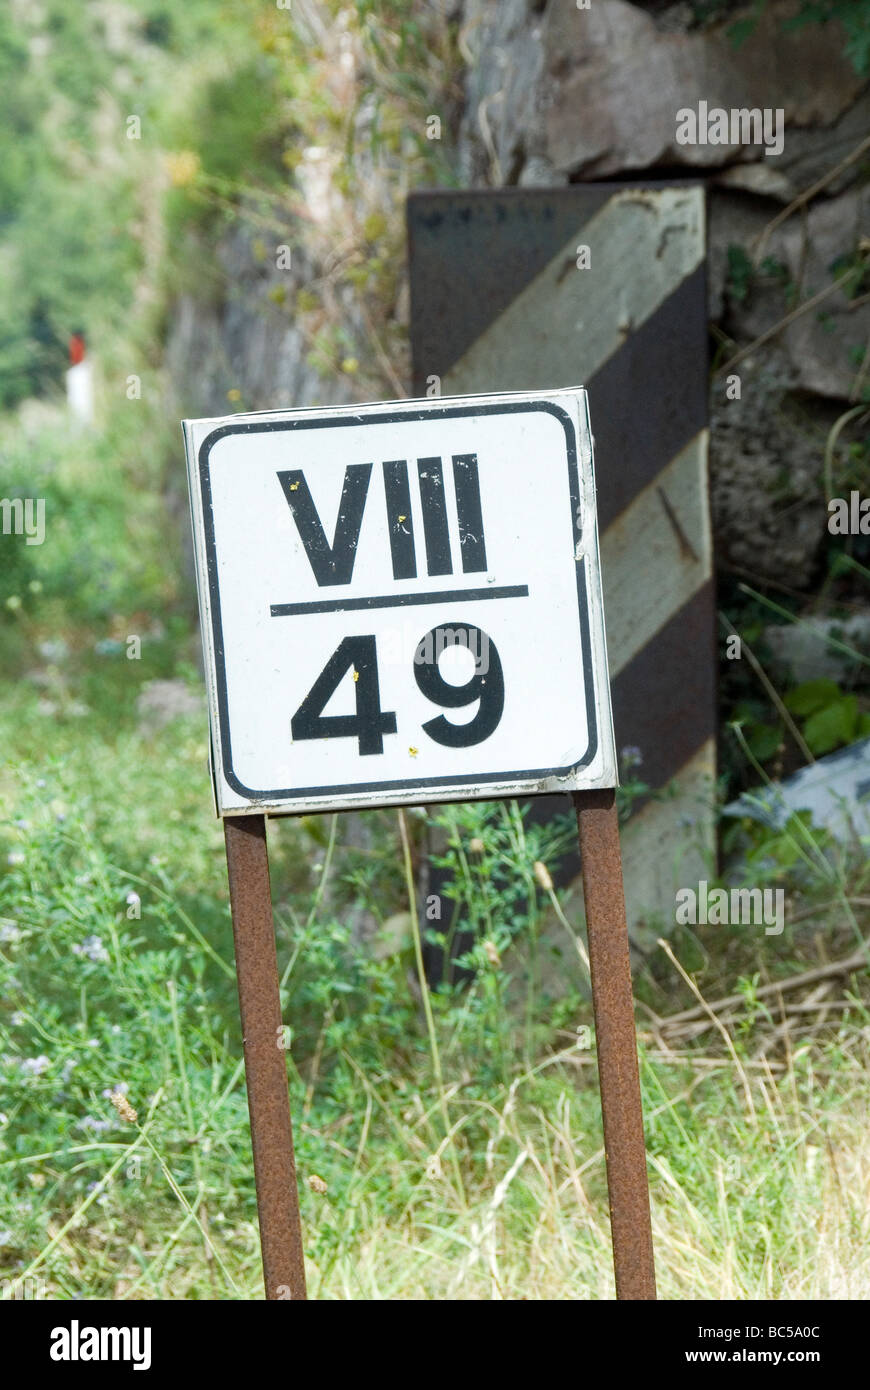 Road milage sign in Roman and Normal numberals Stock Photo